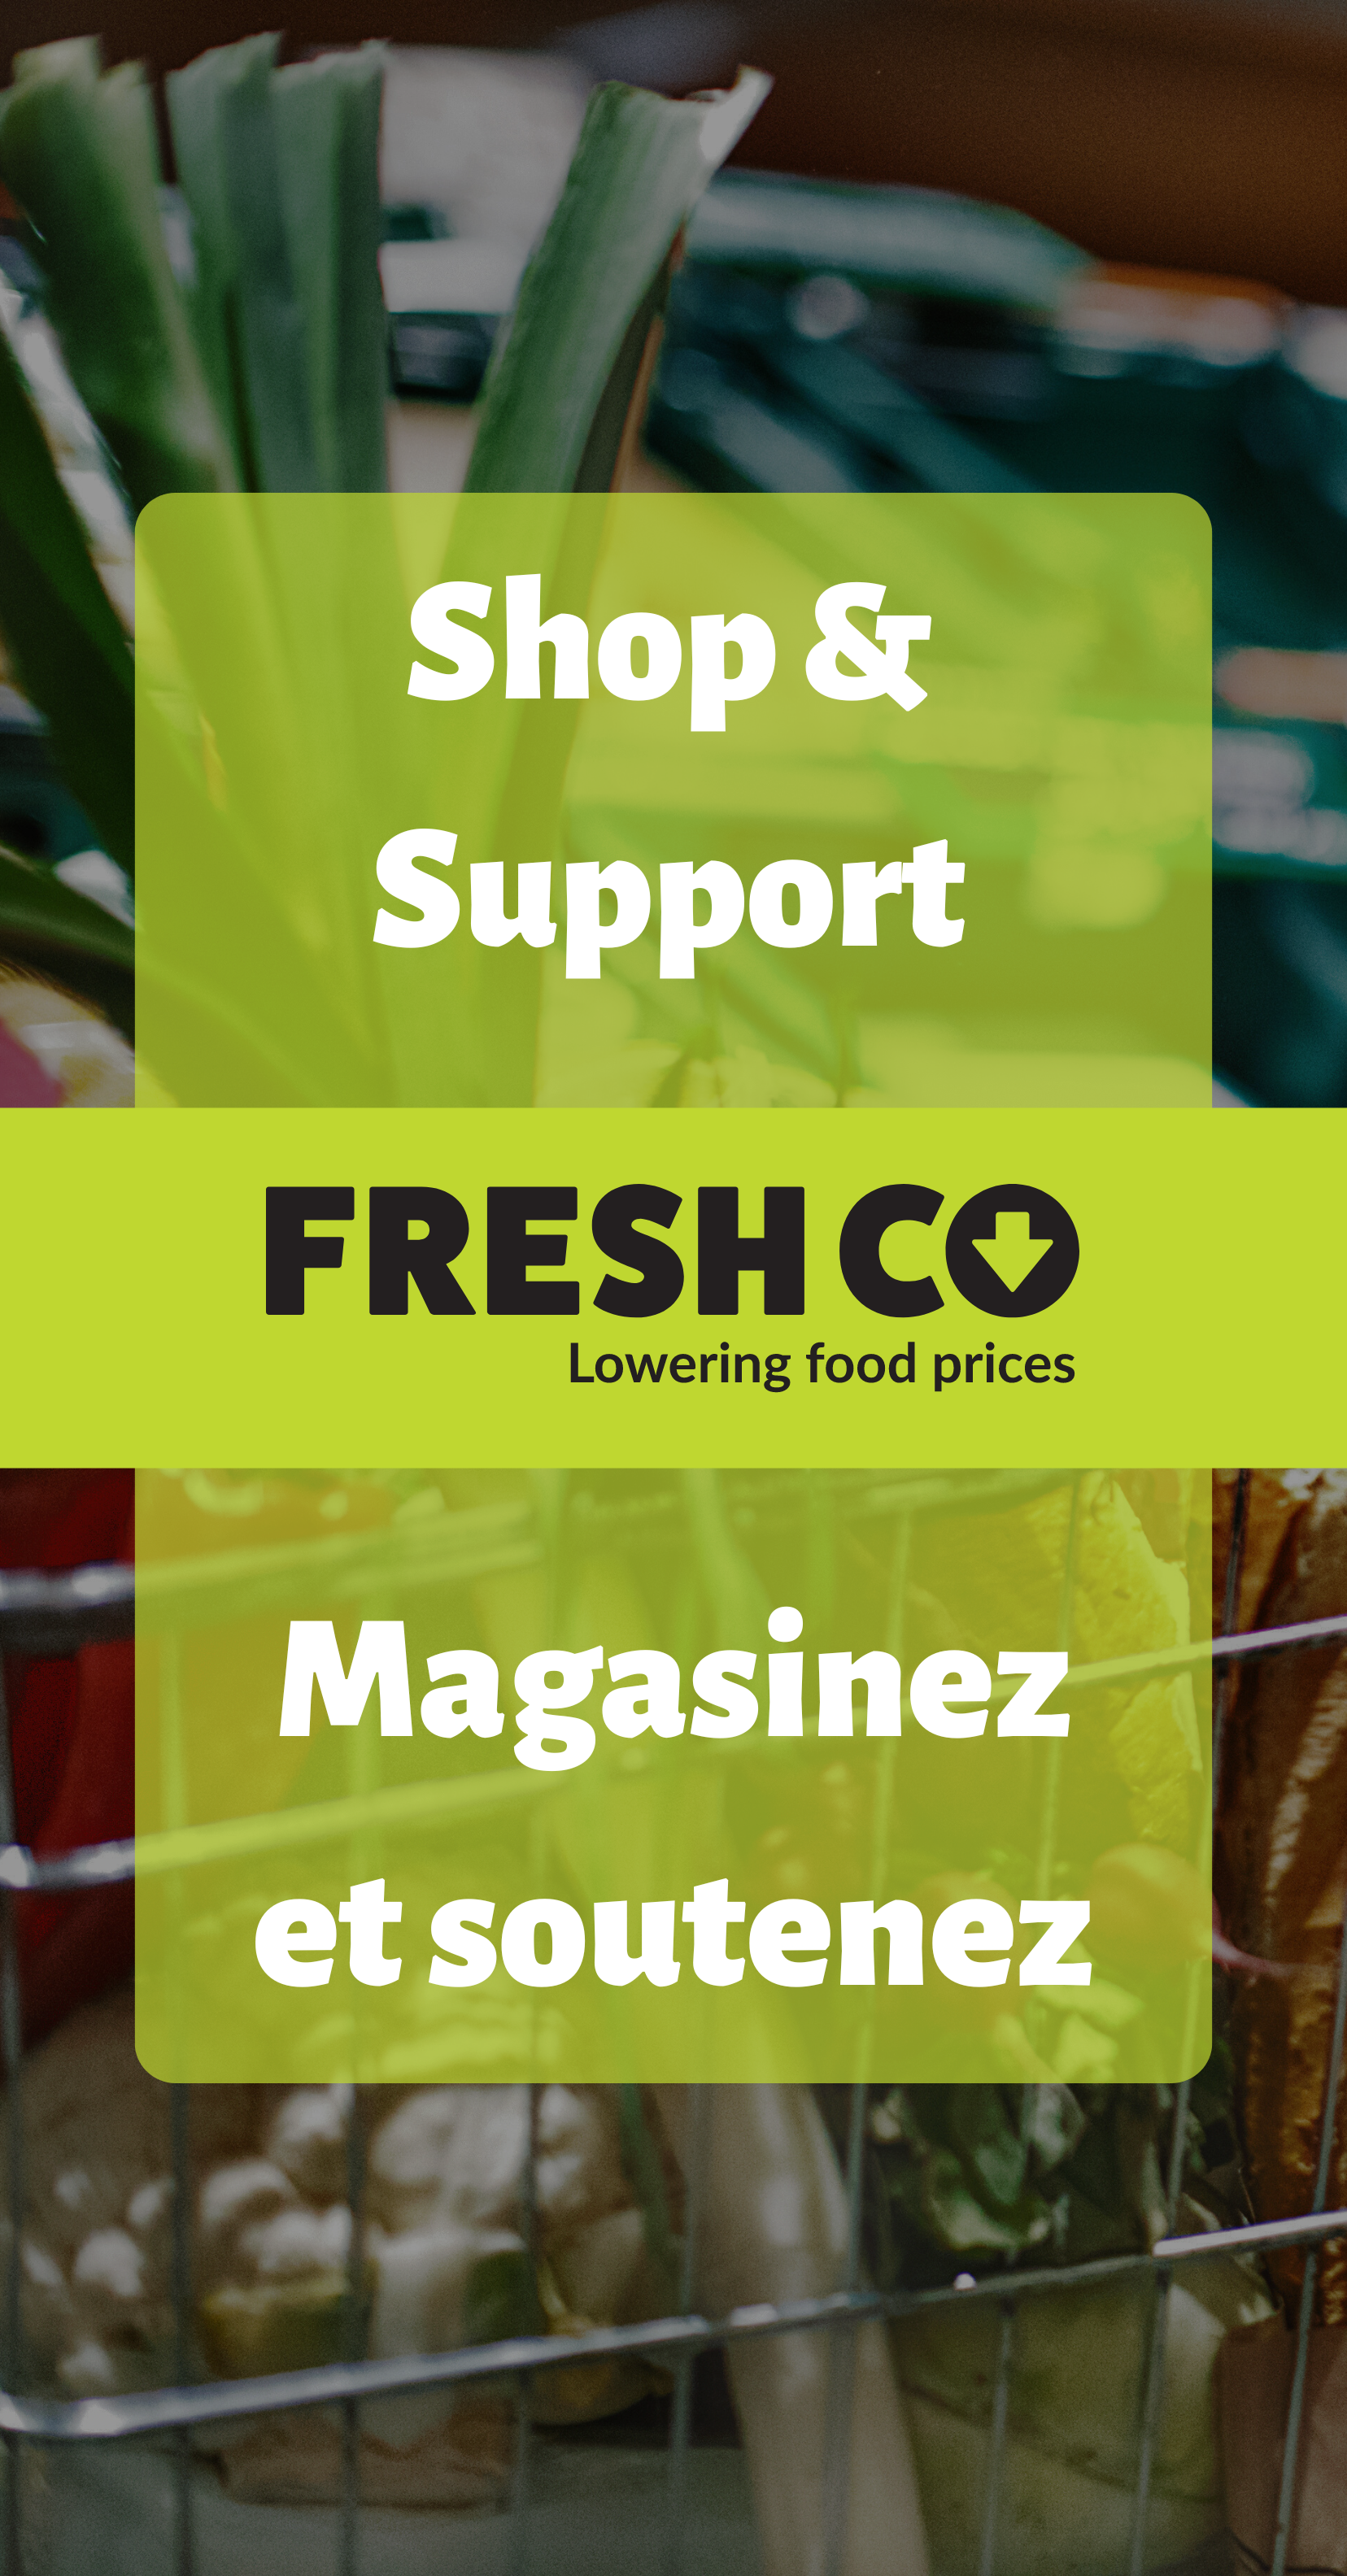 Shop & Support at FreshCo